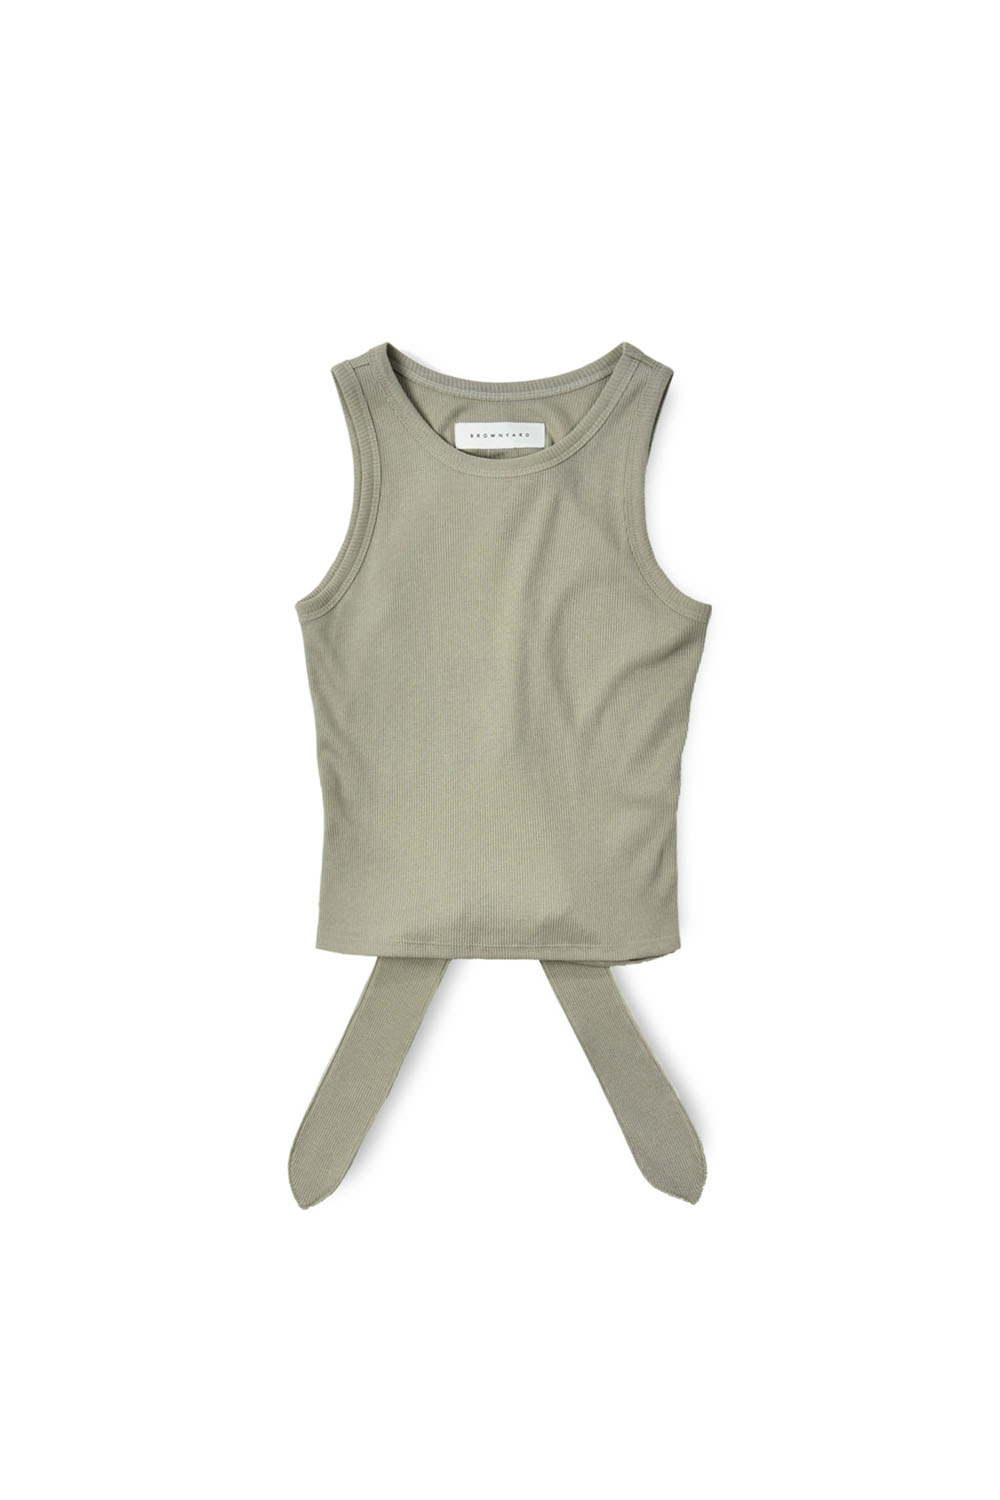 W Ribbed Cut Out Sleeveless_Olive